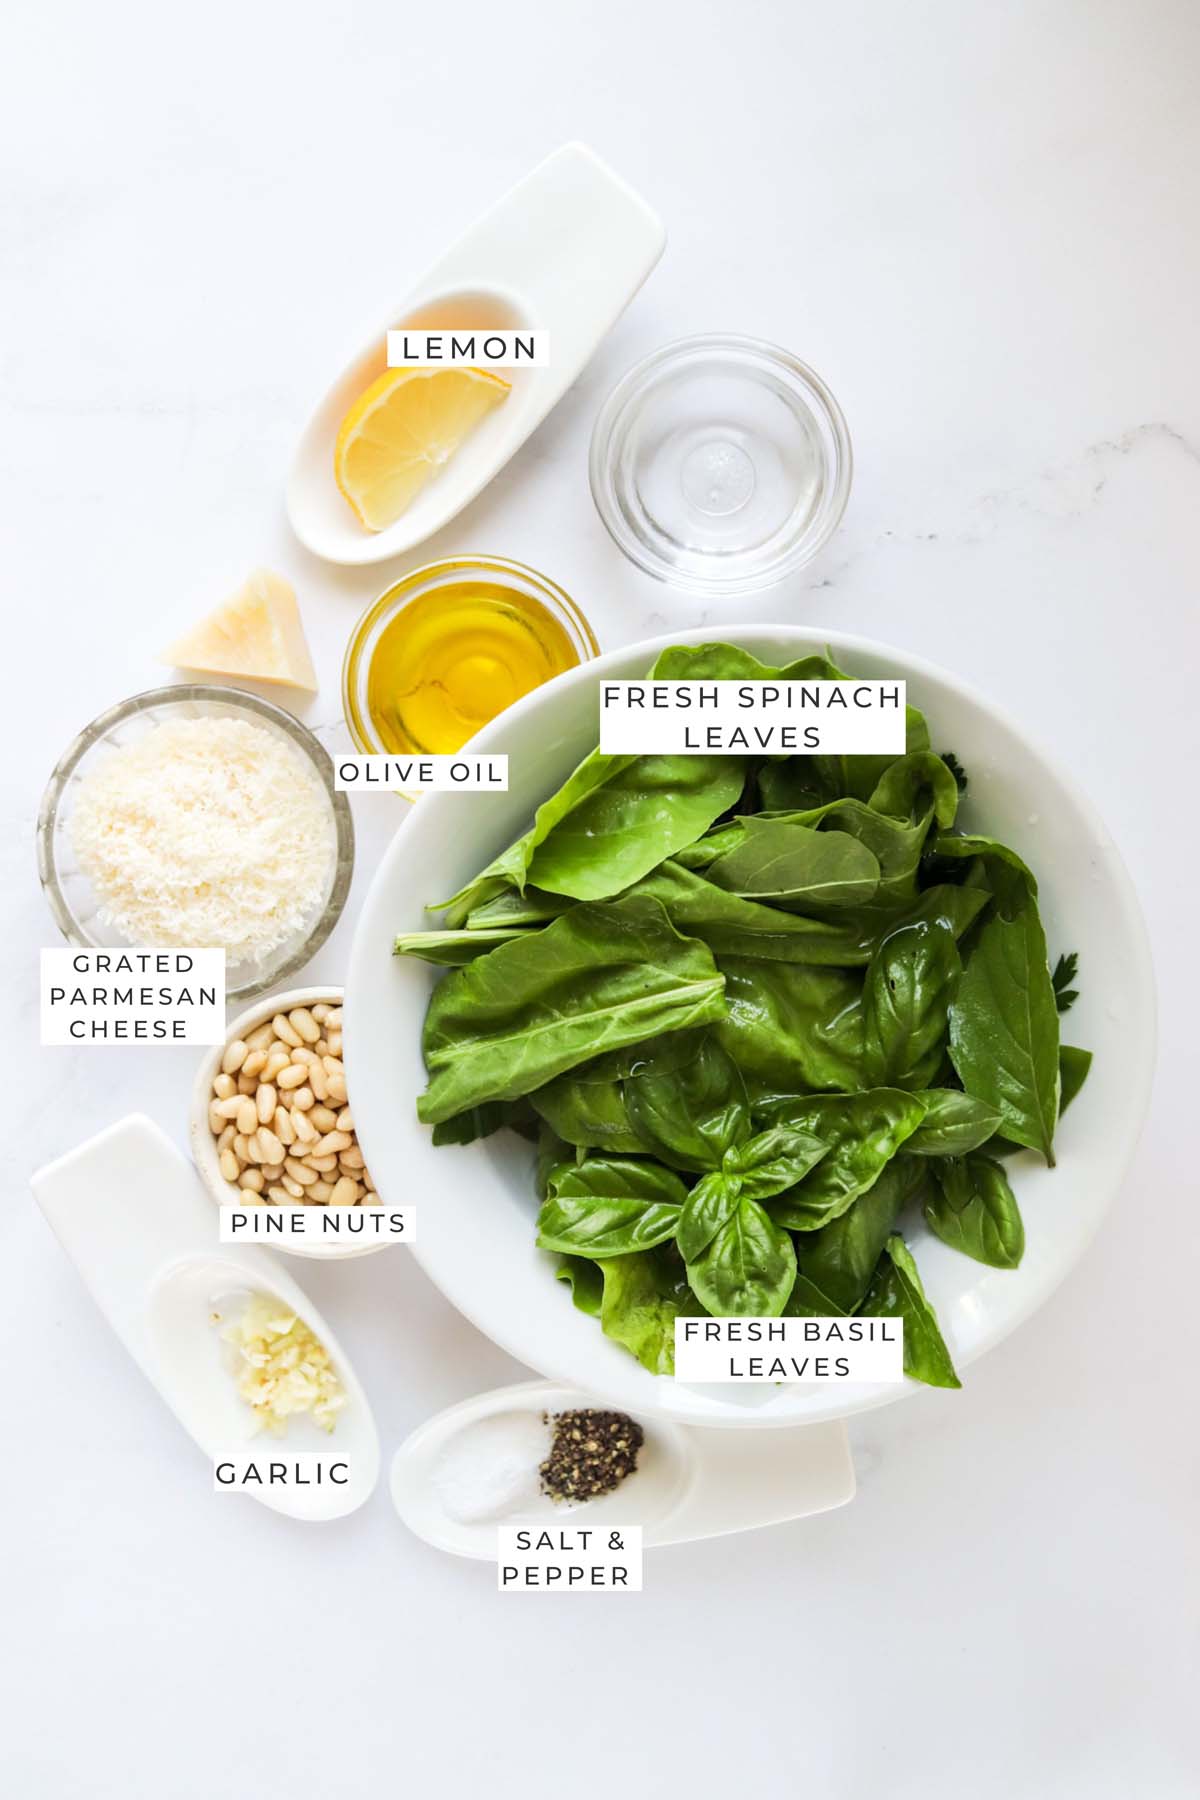 Labeled ingredients for the pesto.